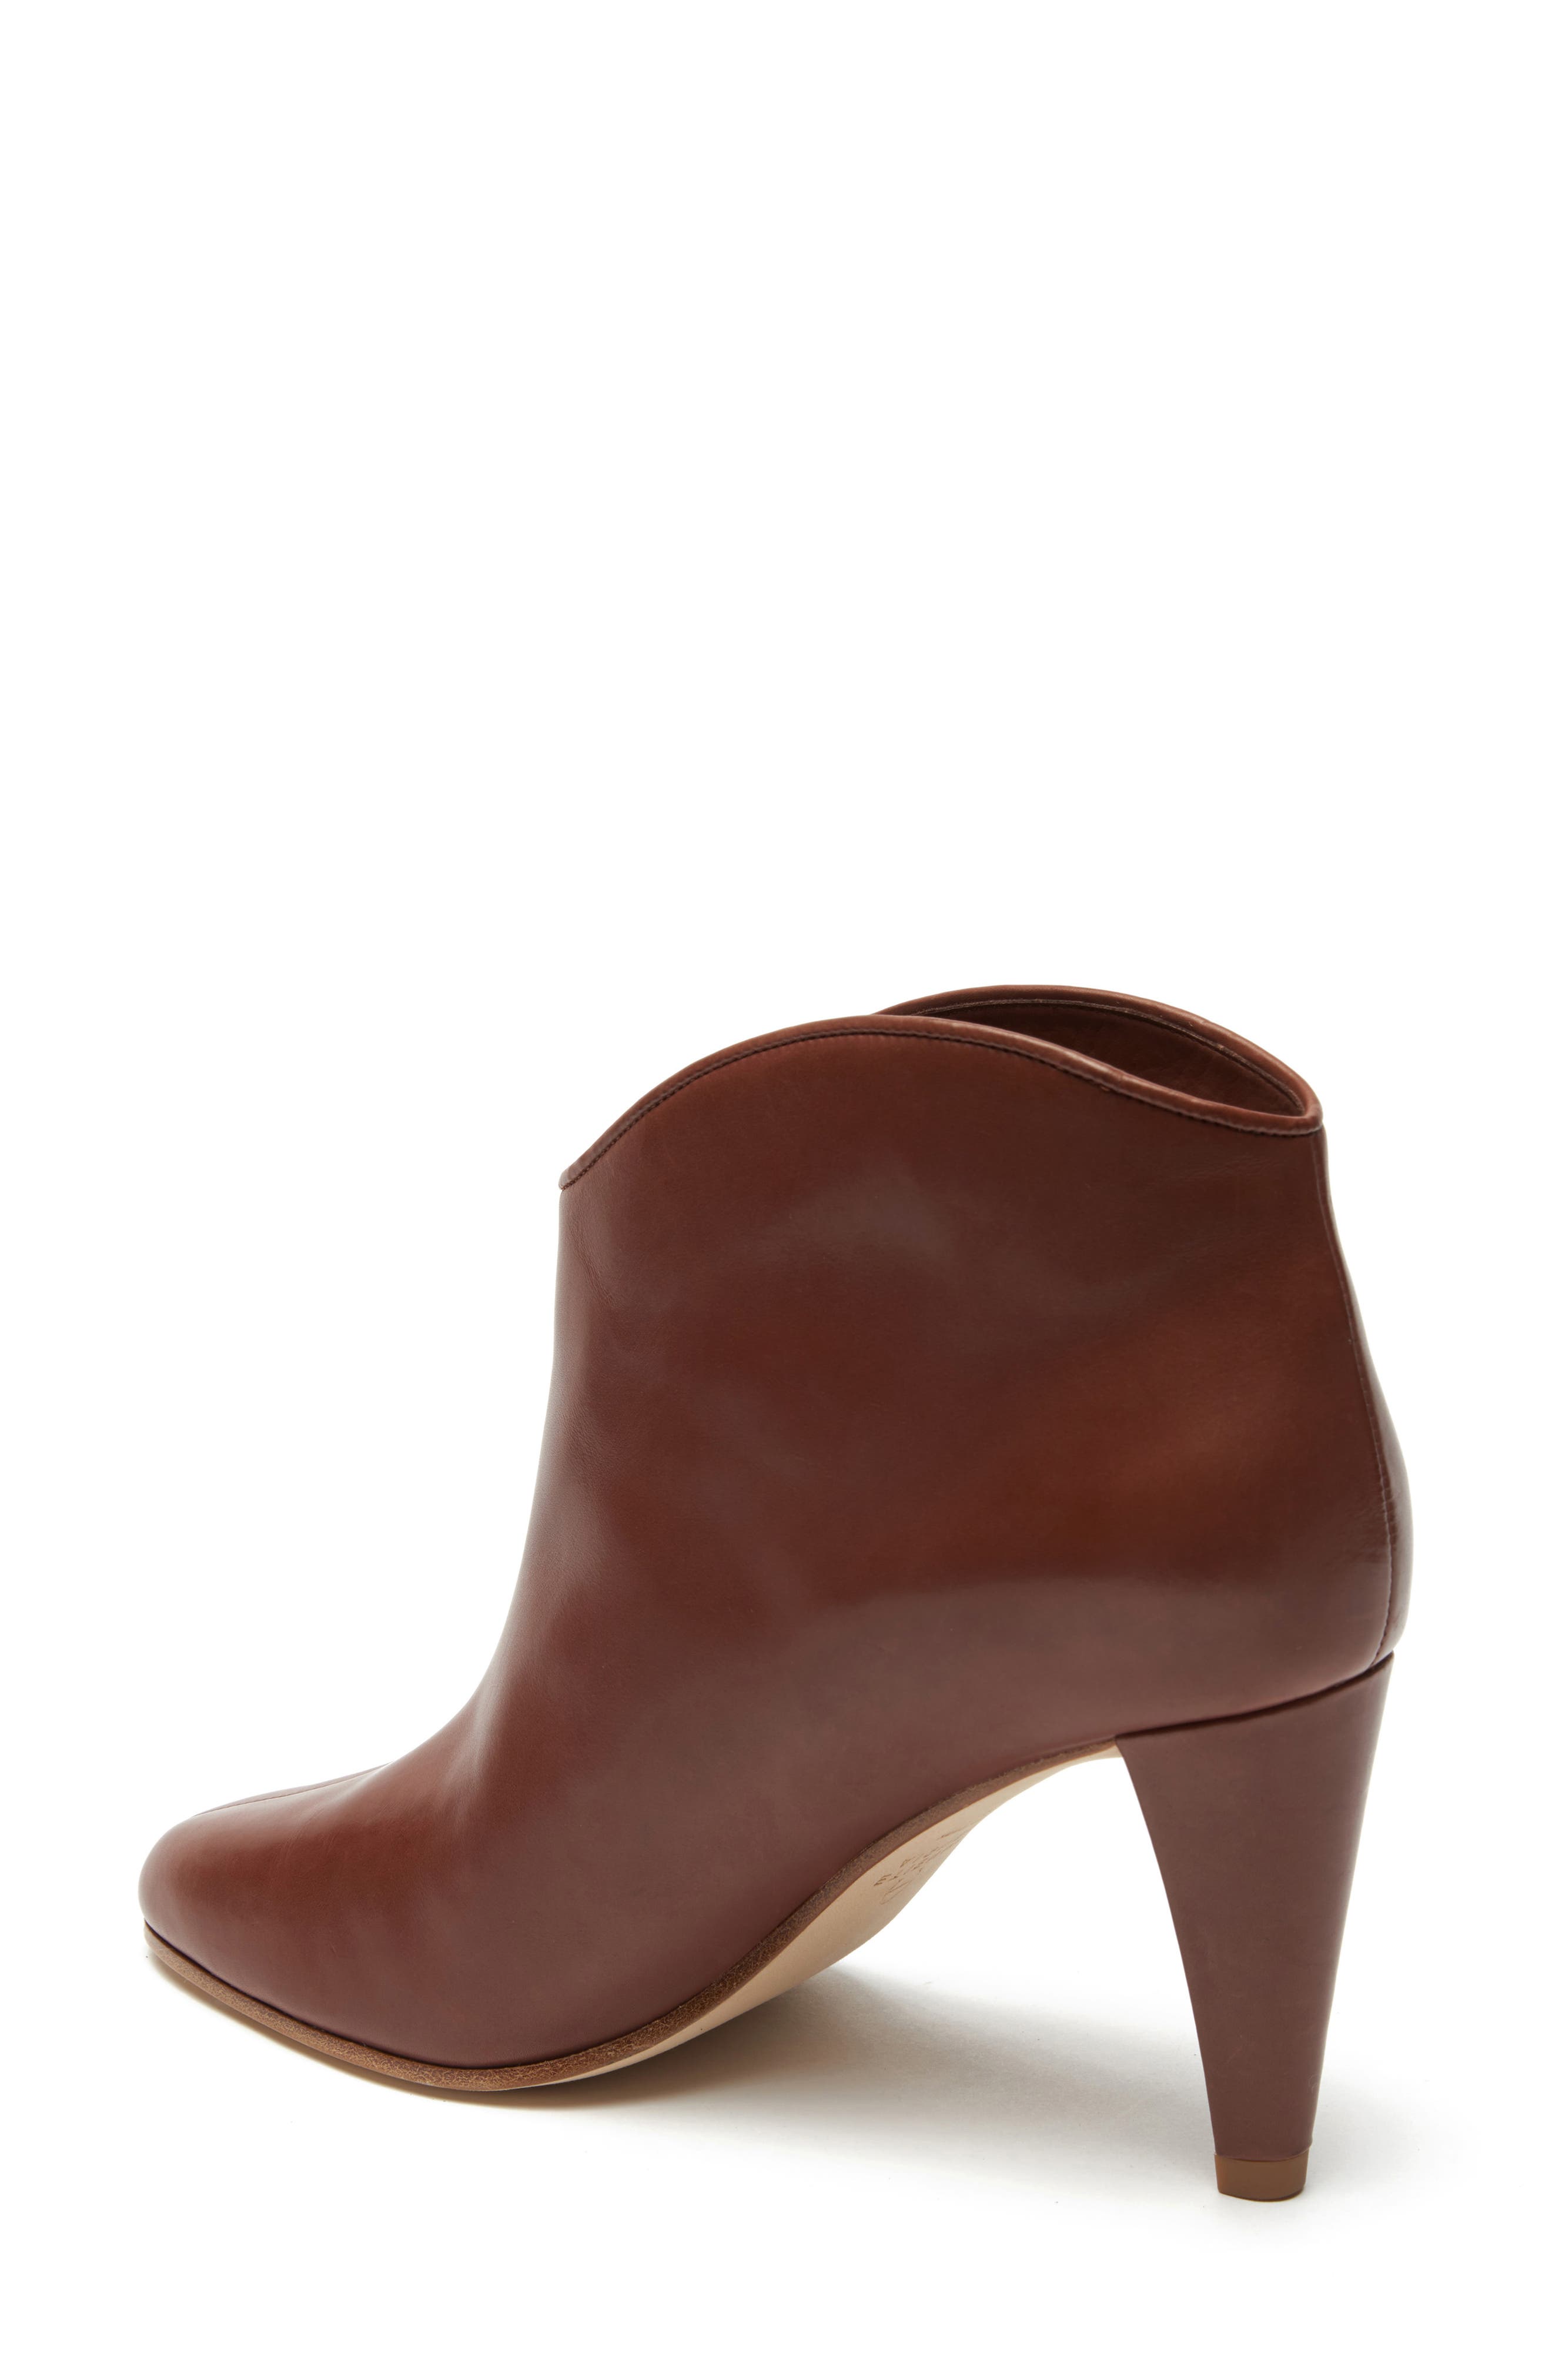 etienne aigner seville leather booties